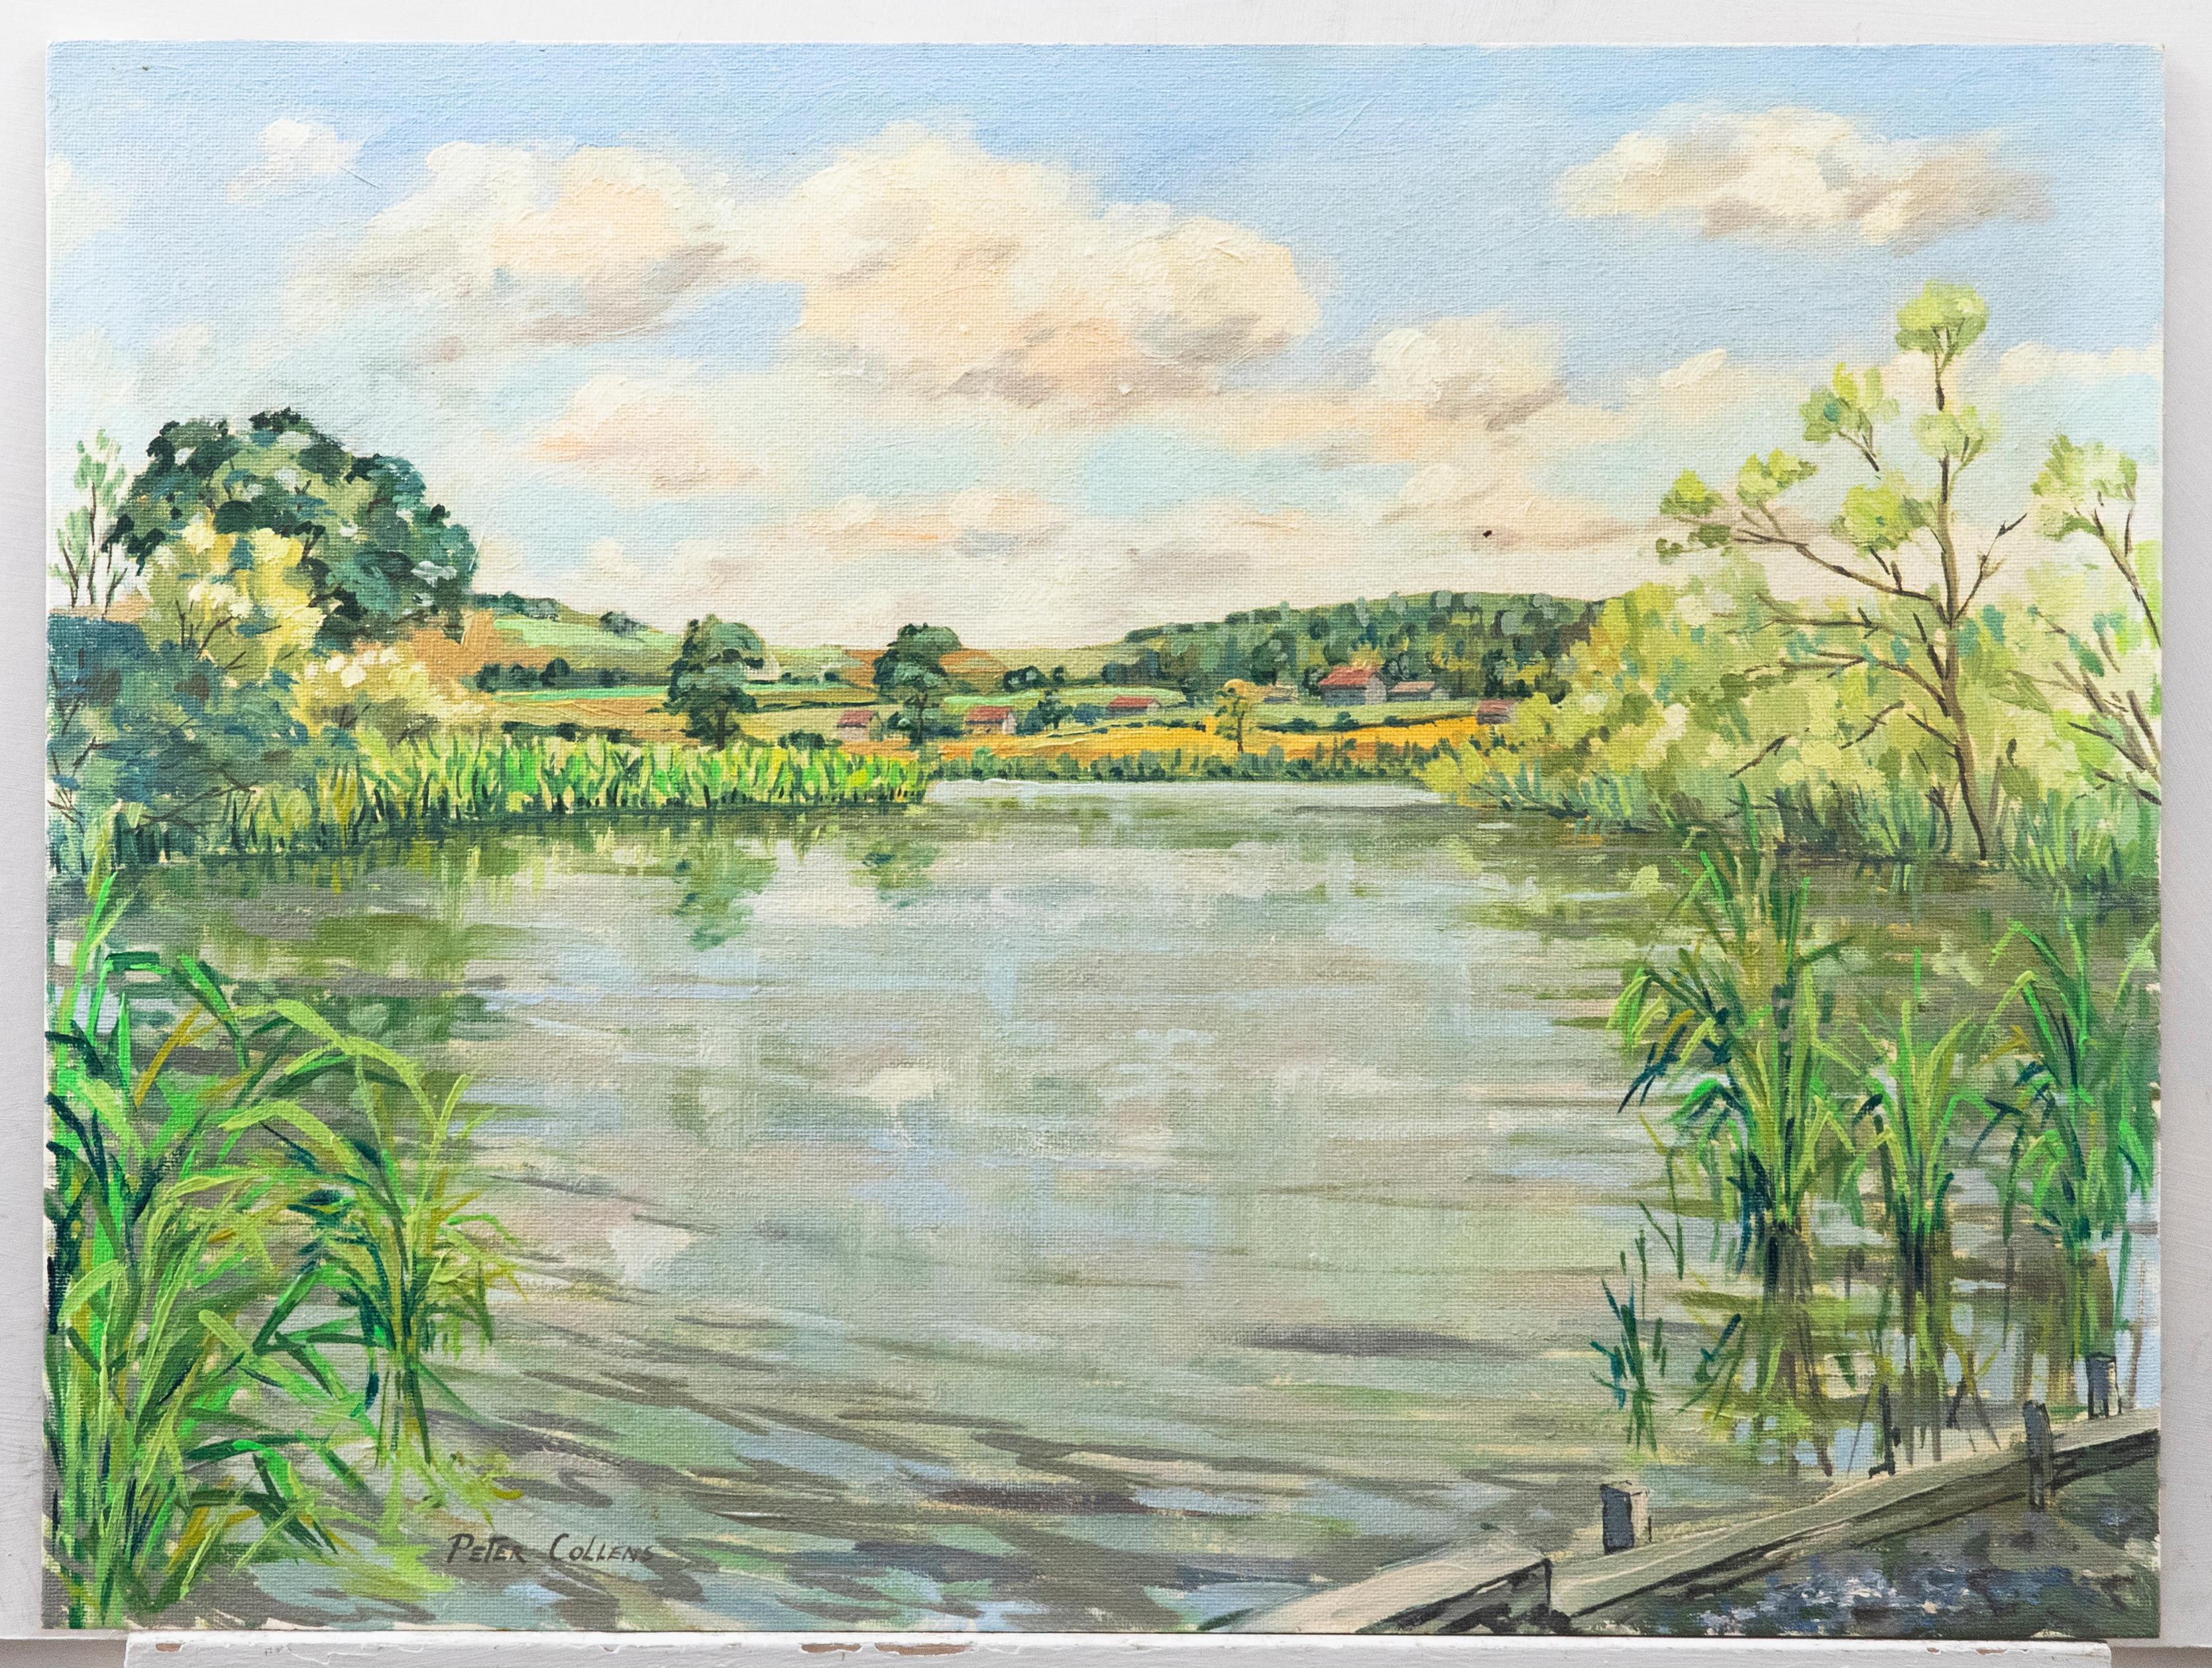 Peter Collens  - 1996 Oil, Patching Pond, Clapham - Painting by Unknown